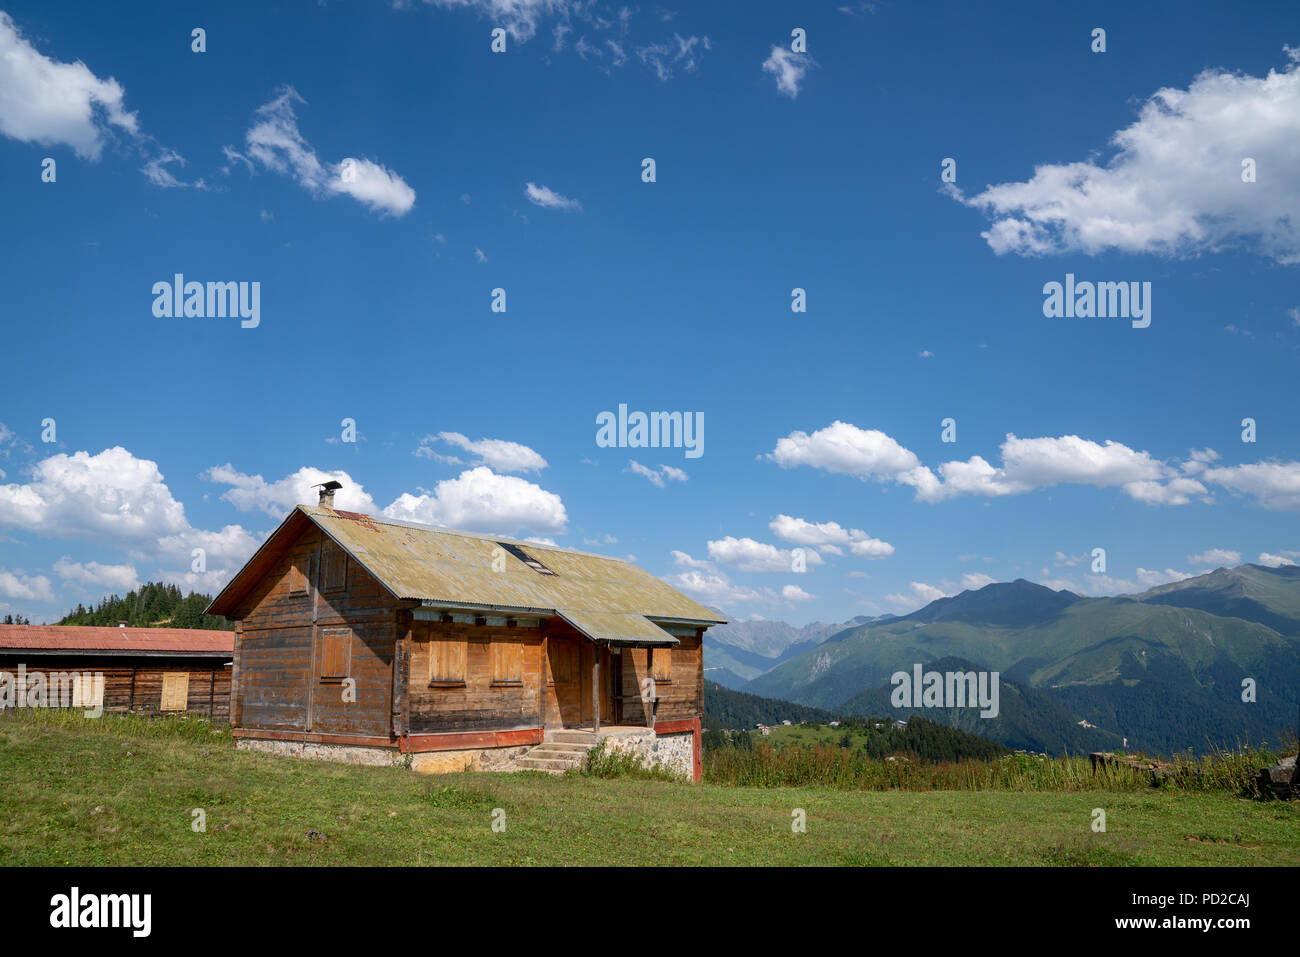 Wooden old bungalow house in nature. Rize, Turkey Stock Photo